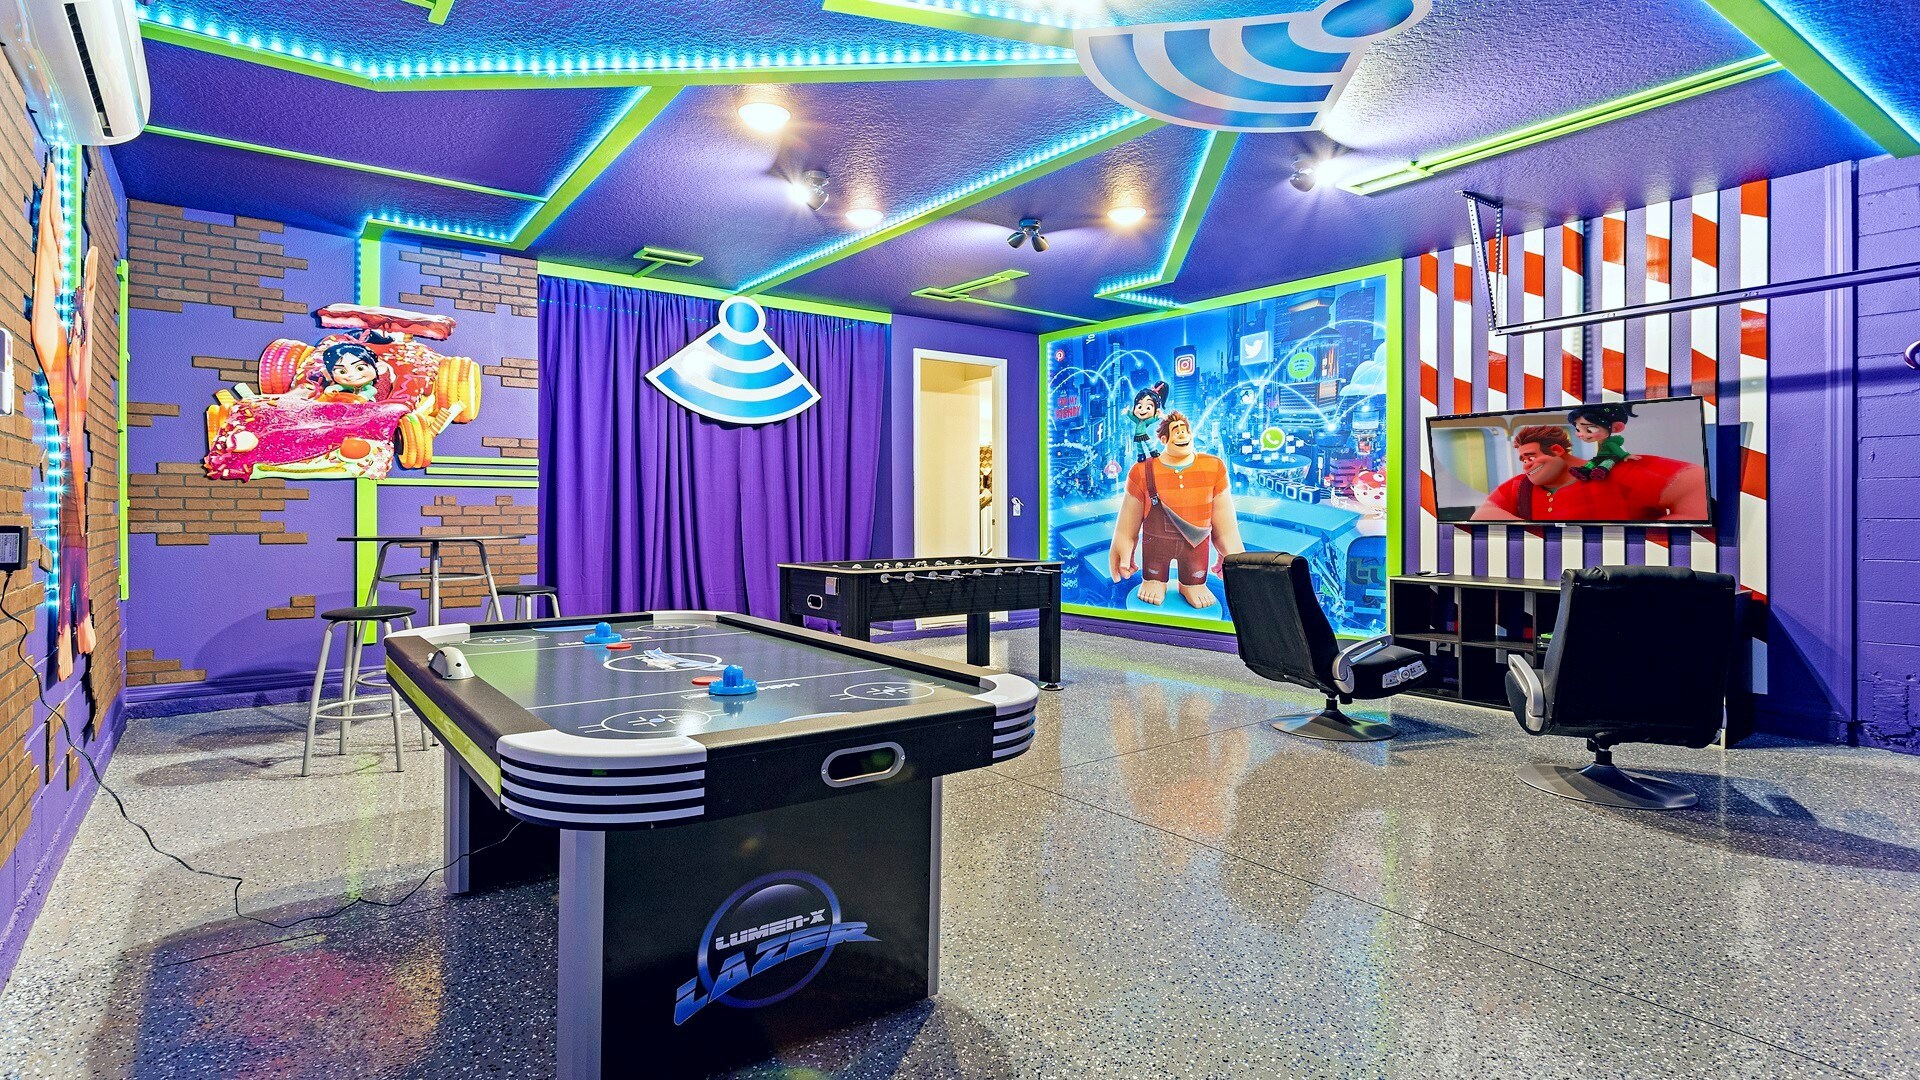 Enjoy the Wreck-it Ralph themed game room with your friends